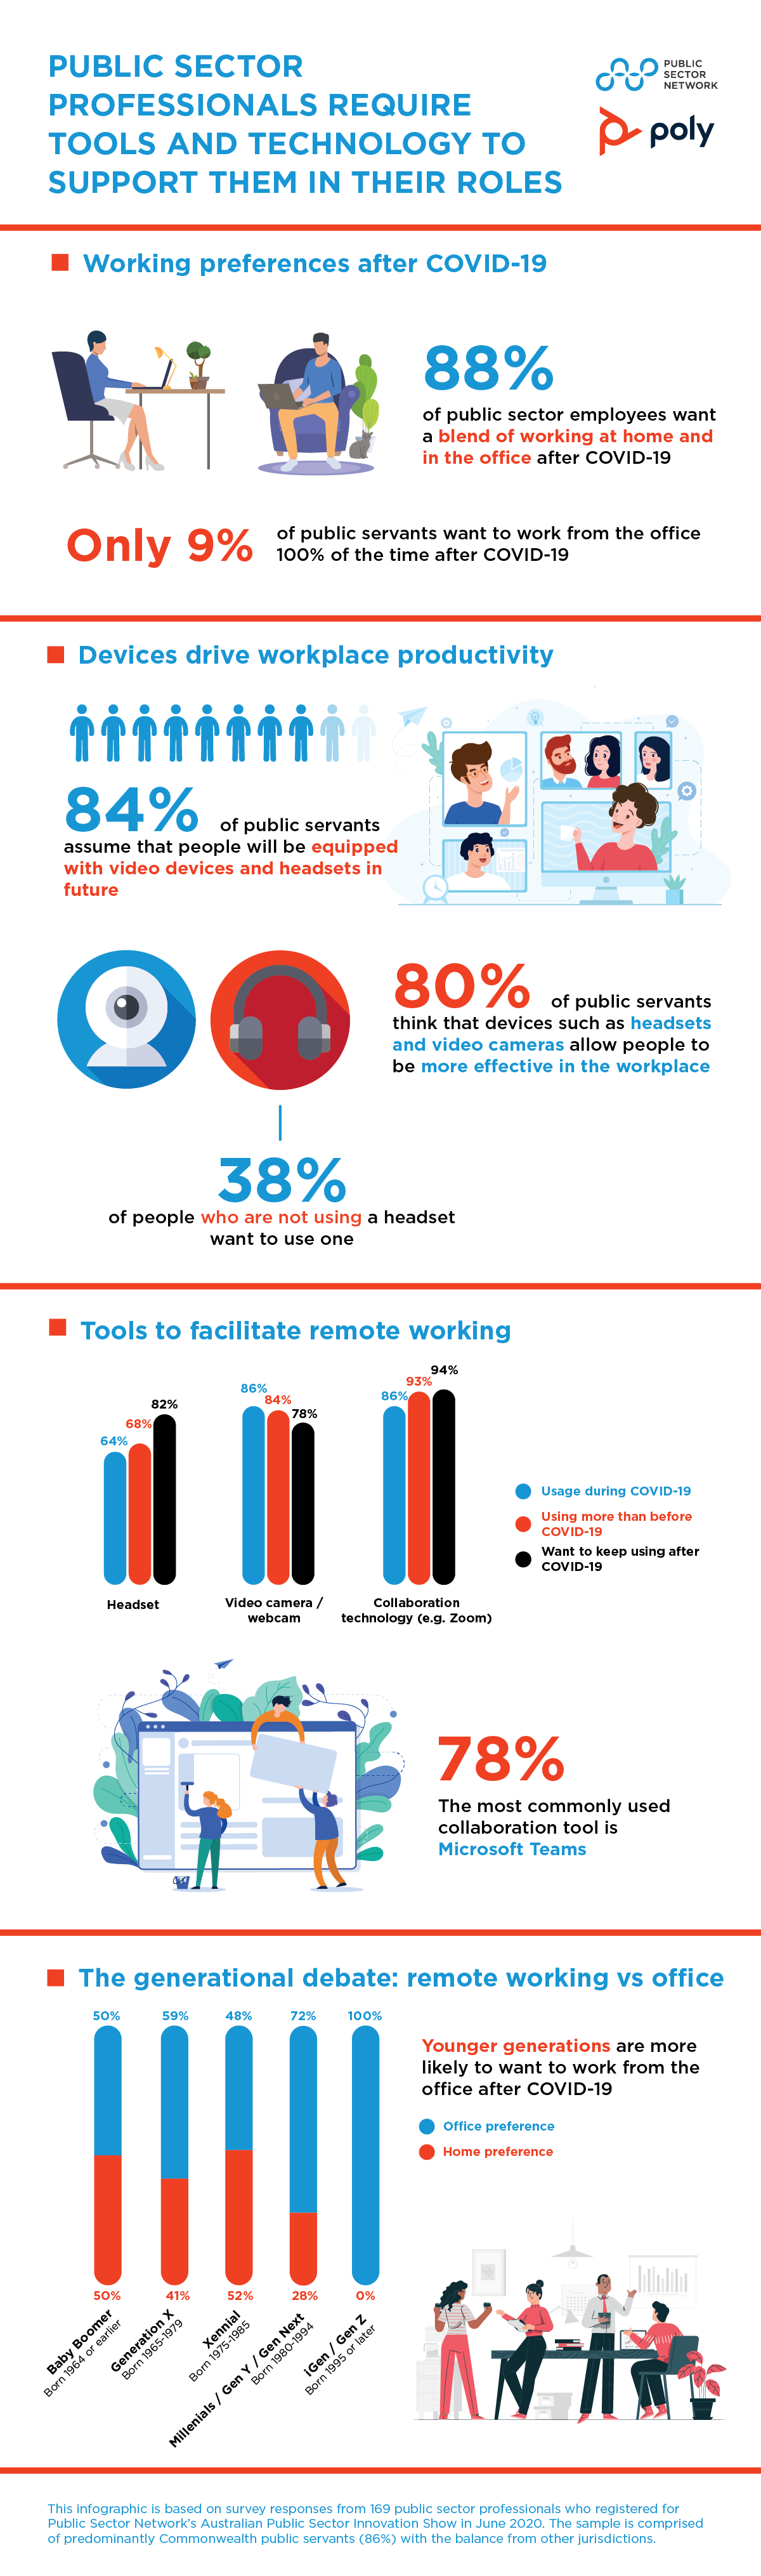 Infographic - Tools and technology available to public sector professionals